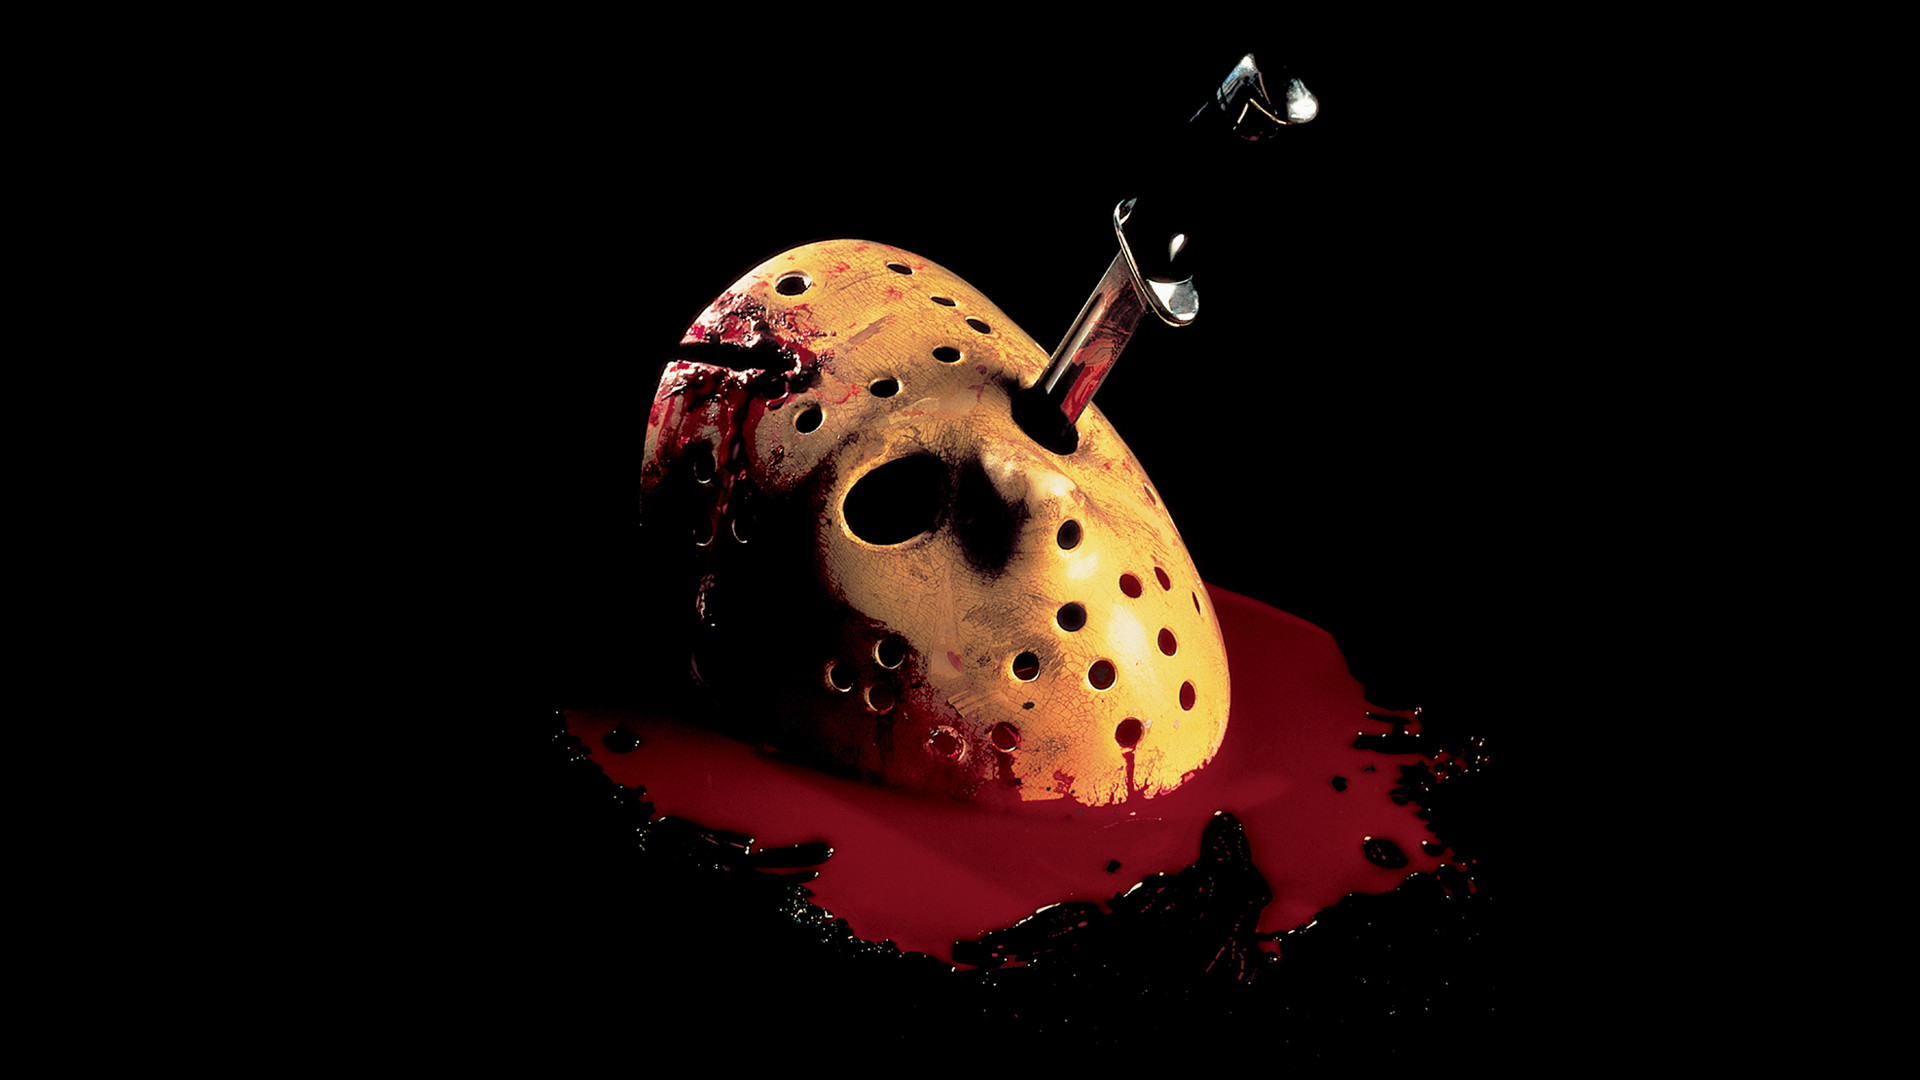 1920x1080 1 Friday the 13th: The Final Chapter HD Wallpapers | Backgrounds - Wallpaper  Abyss